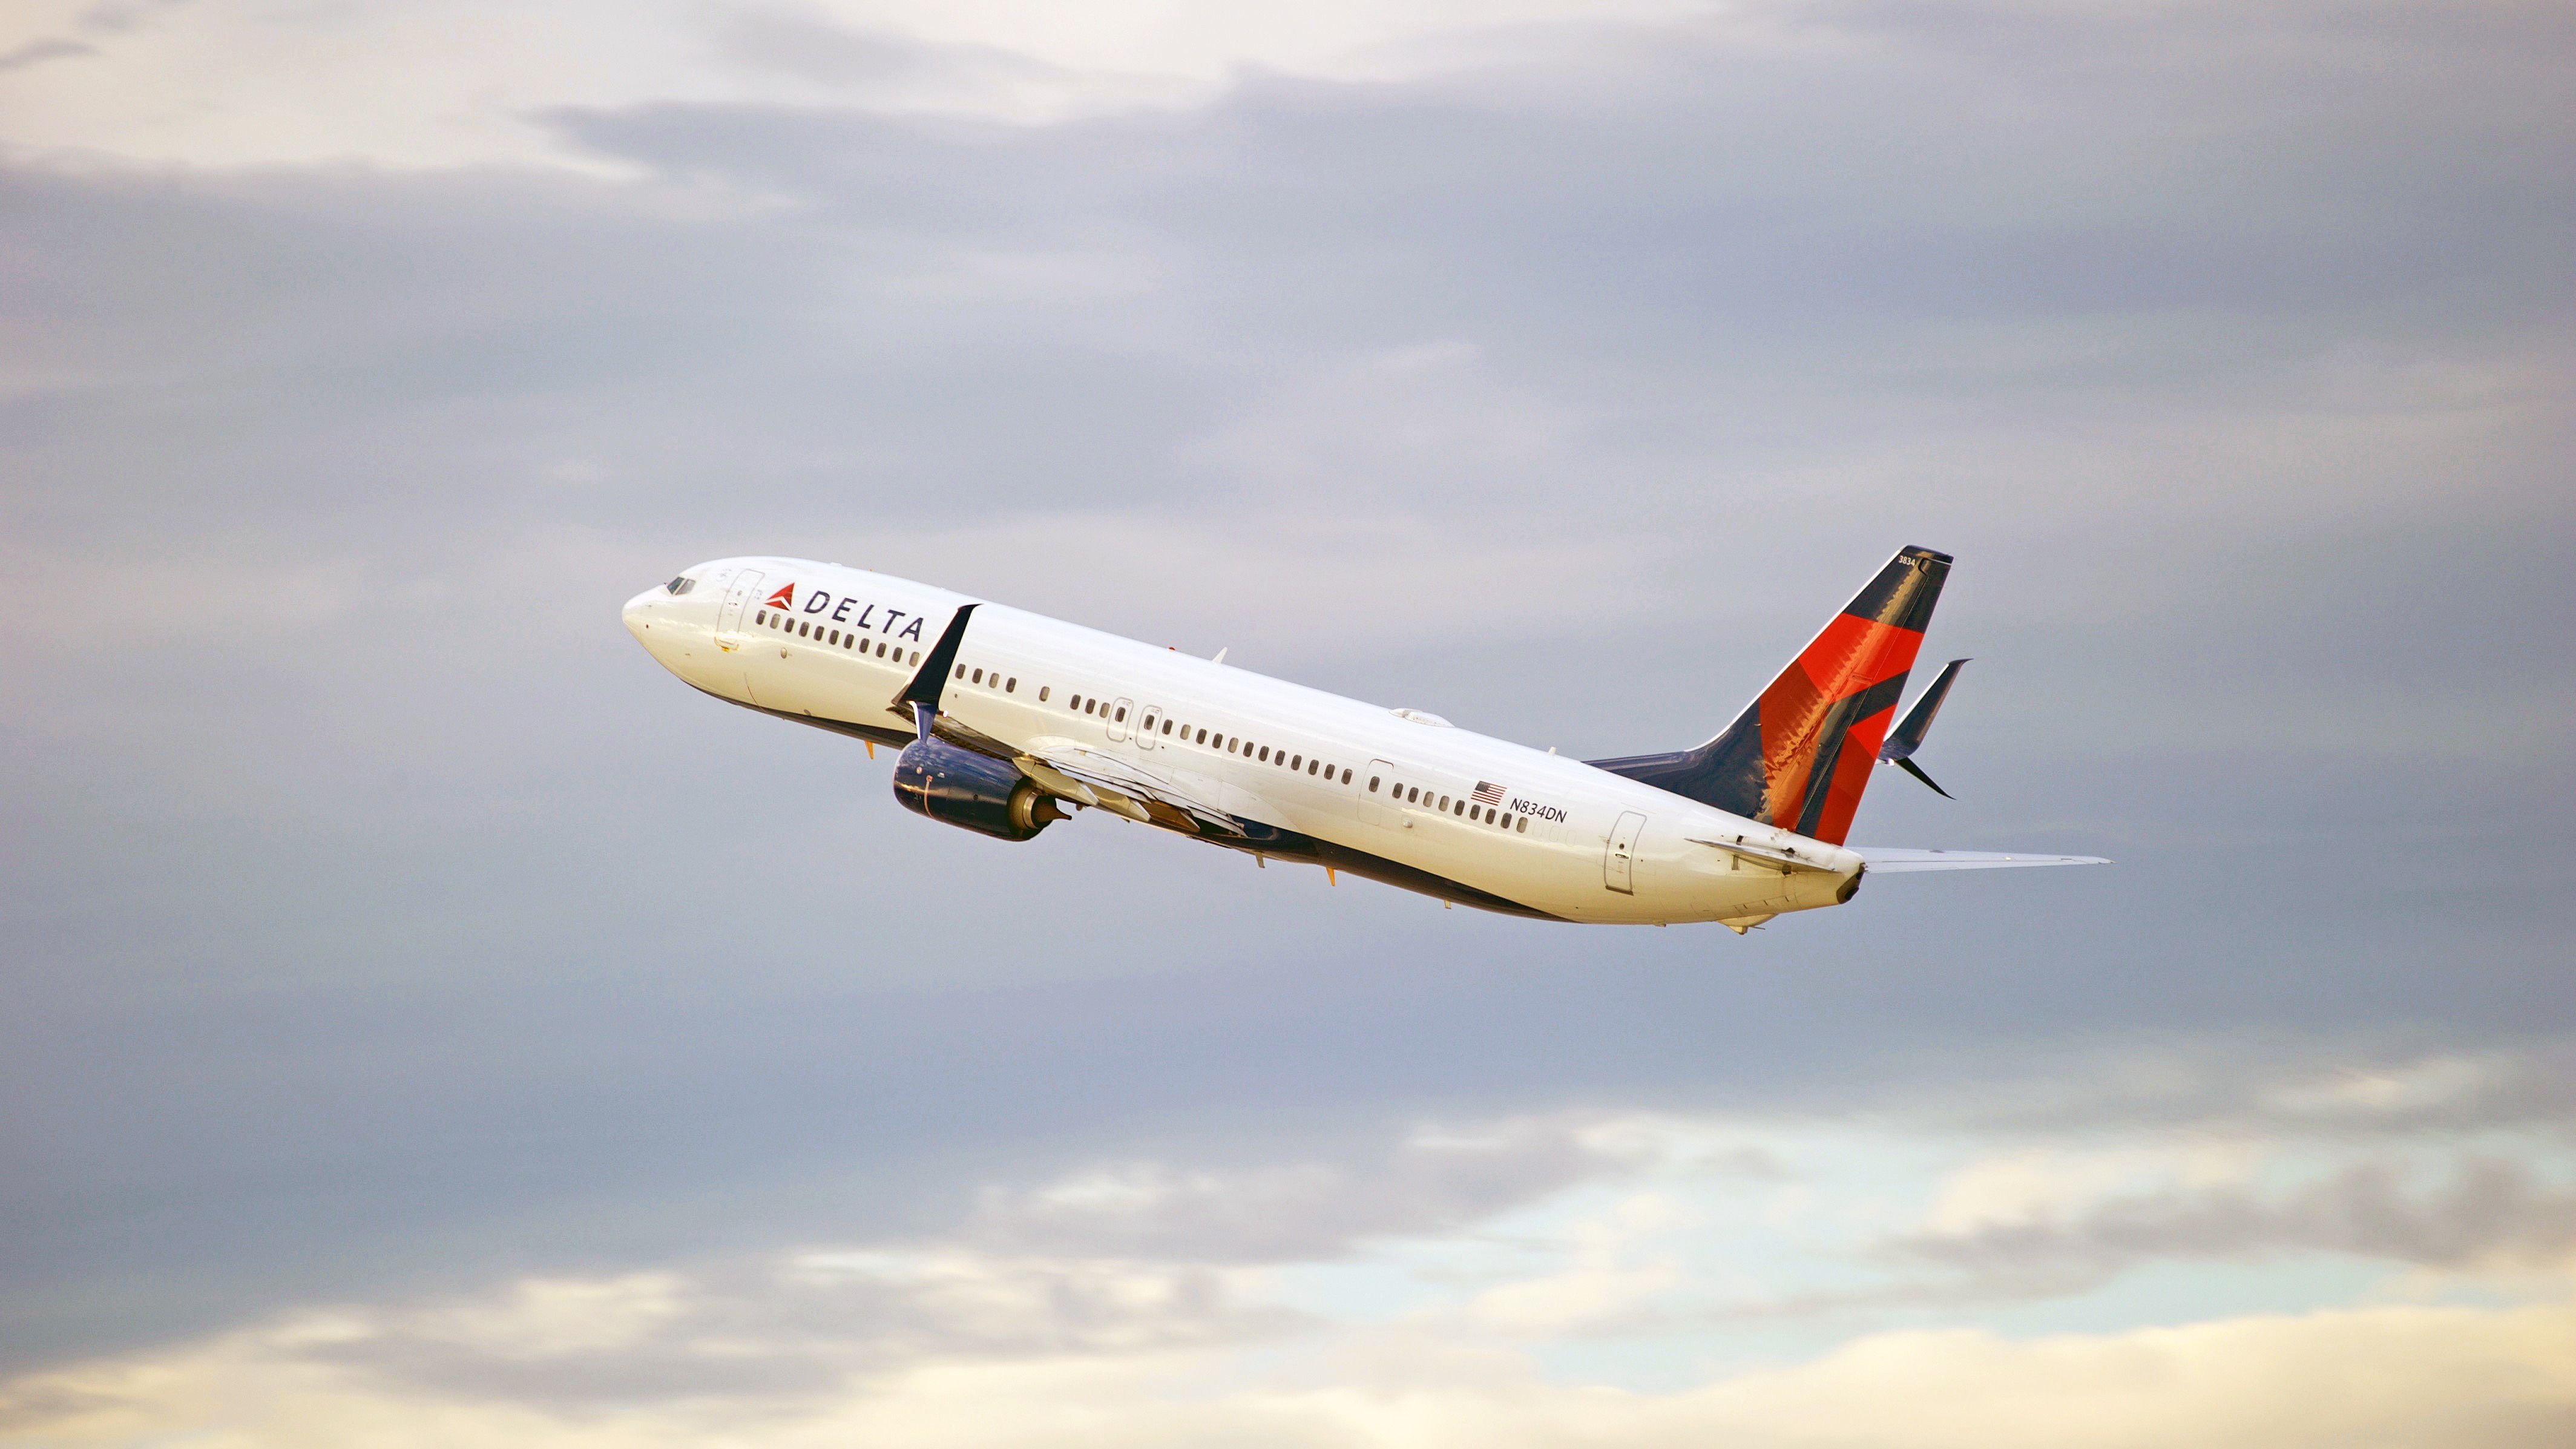 A Delta Air Lines Boeing 737-900ER flying in the sky.